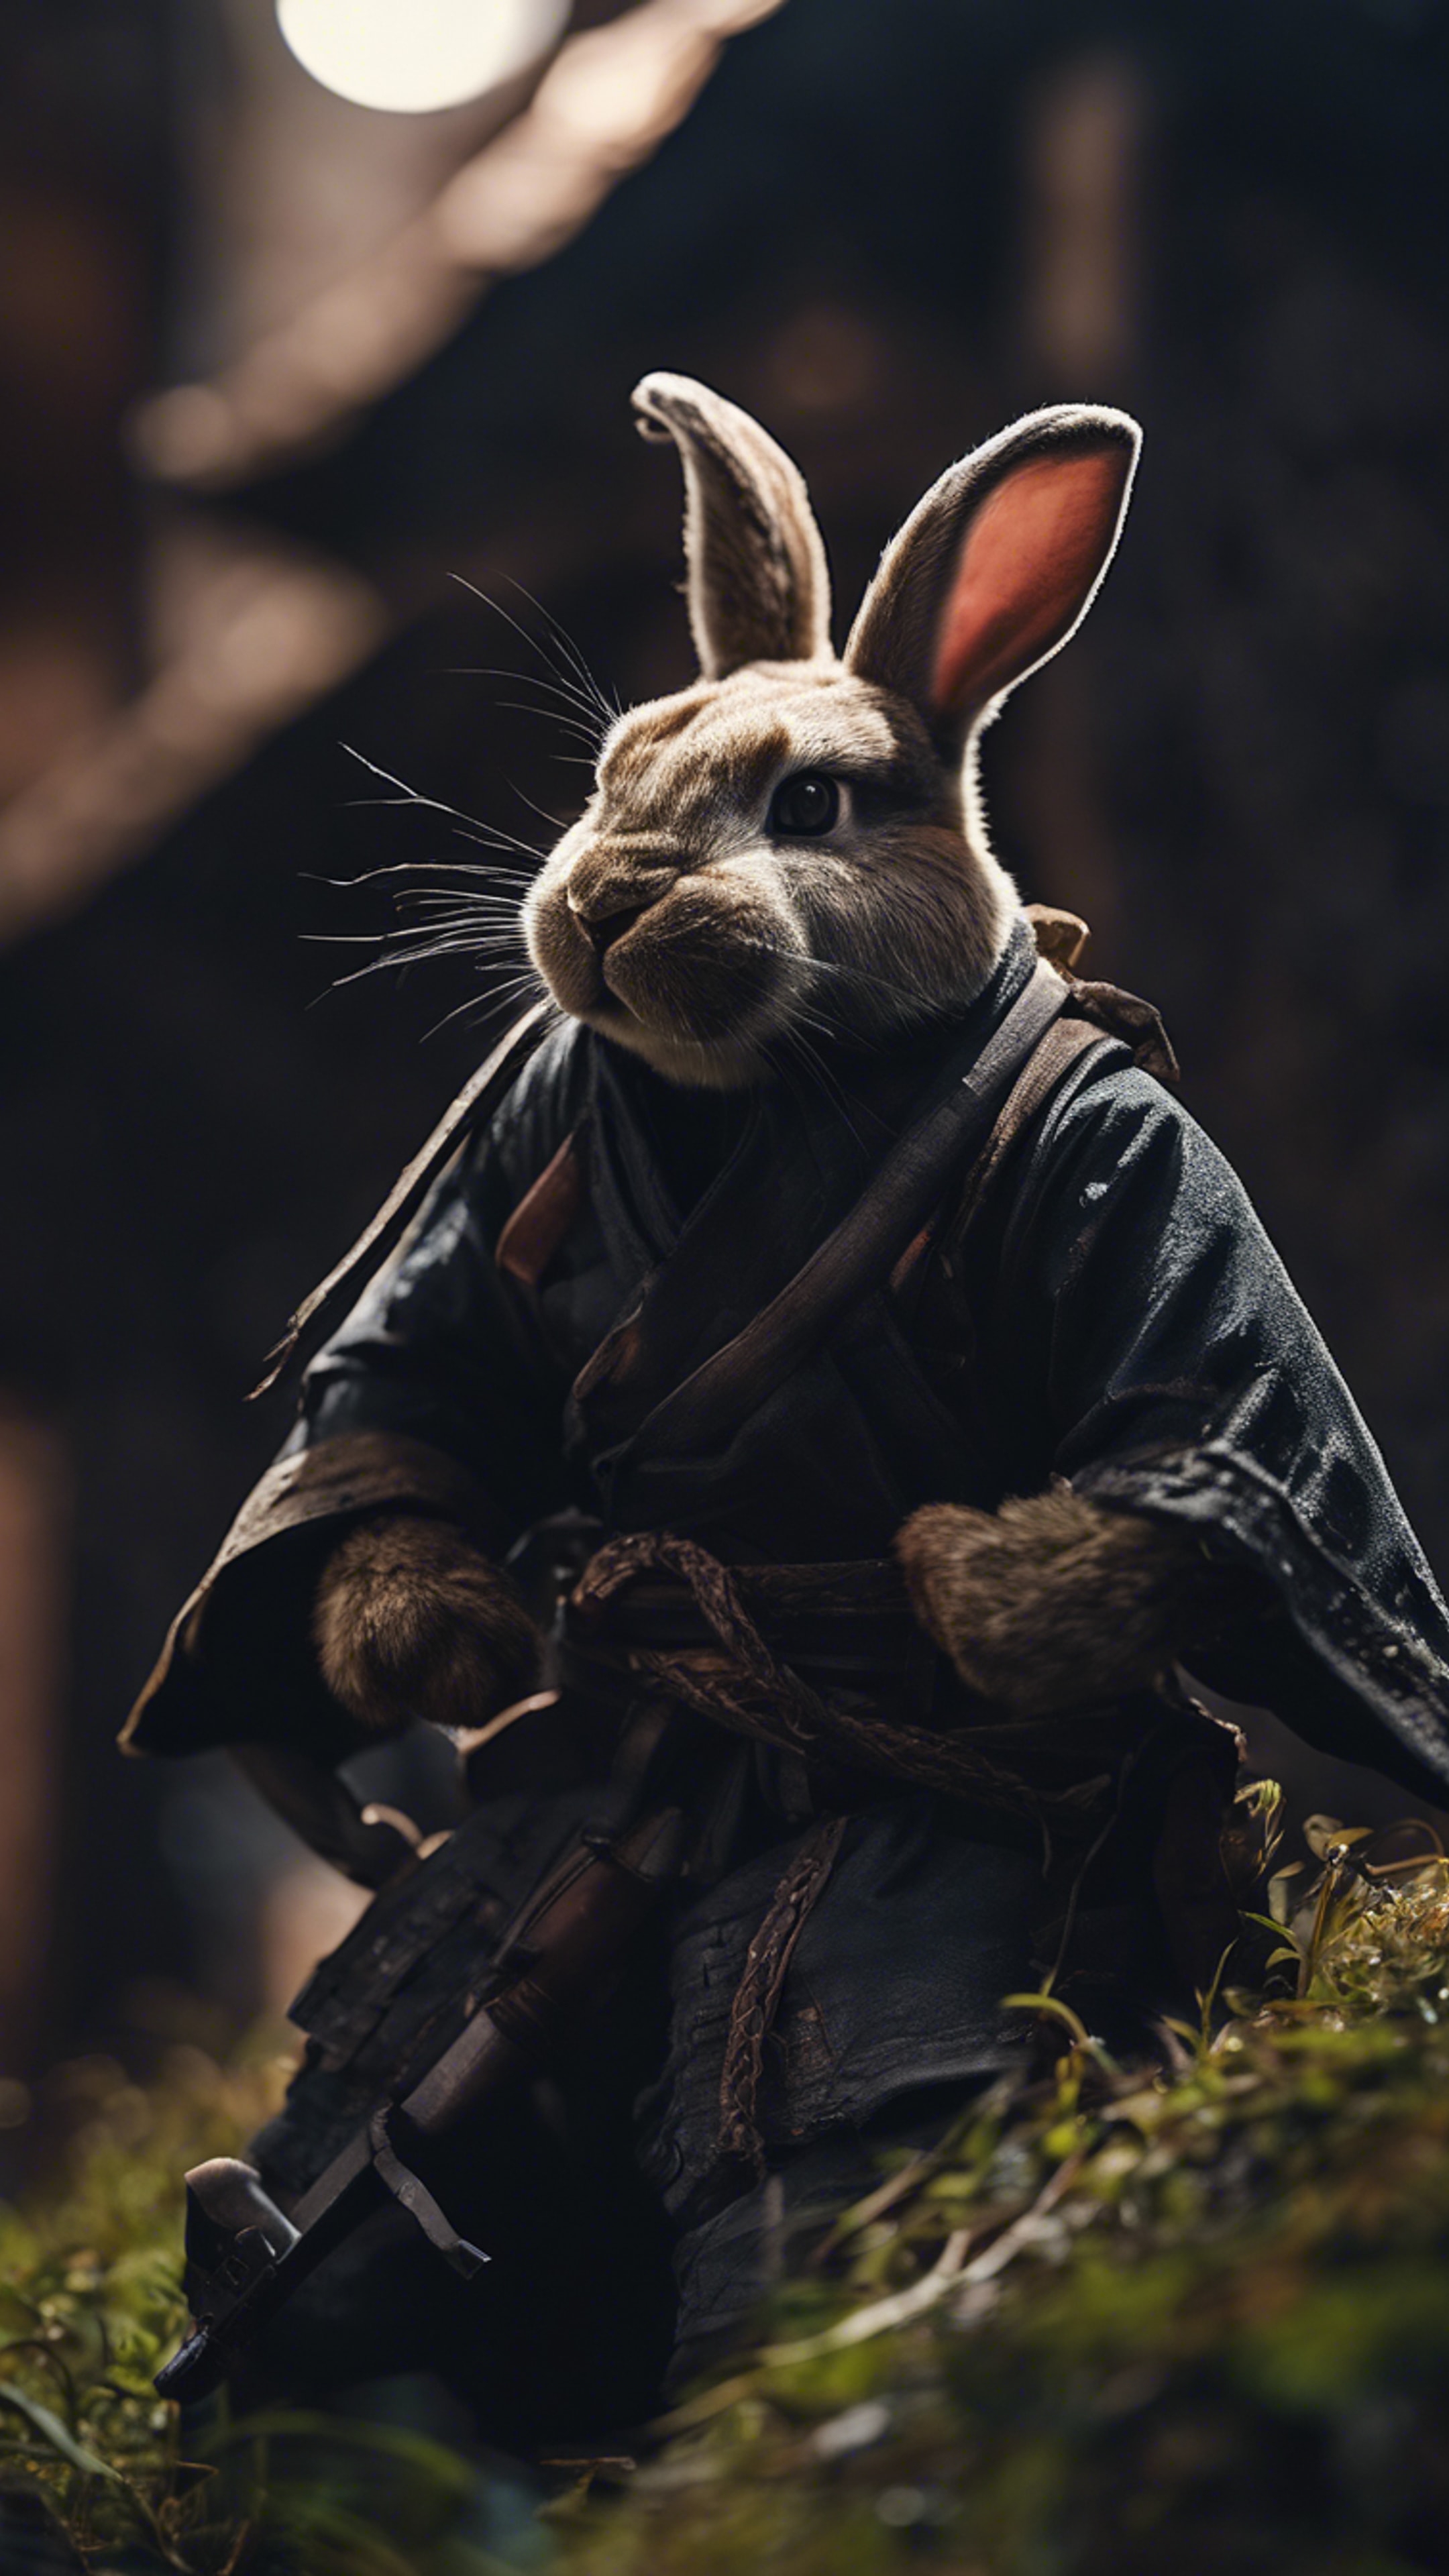 A rabbit ninja stealthily infiltrating a fortress under the cover of darkness. Обои[6531f33b70ff4f28bd8a]